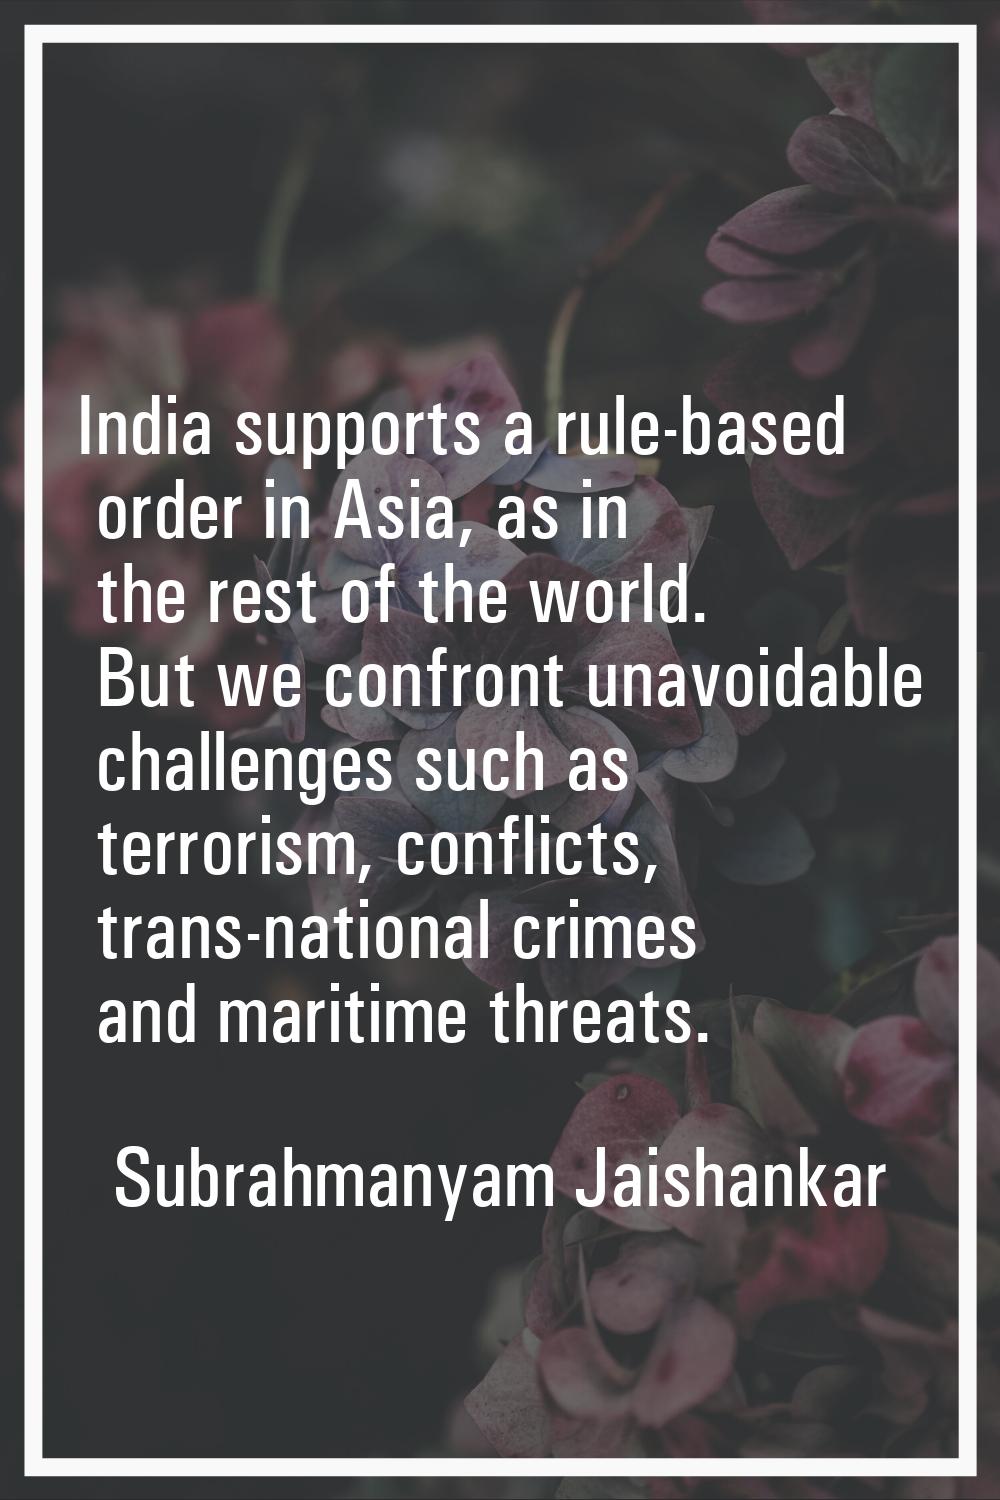 India supports a rule-based order in Asia, as in the rest of the world. But we confront unavoidable